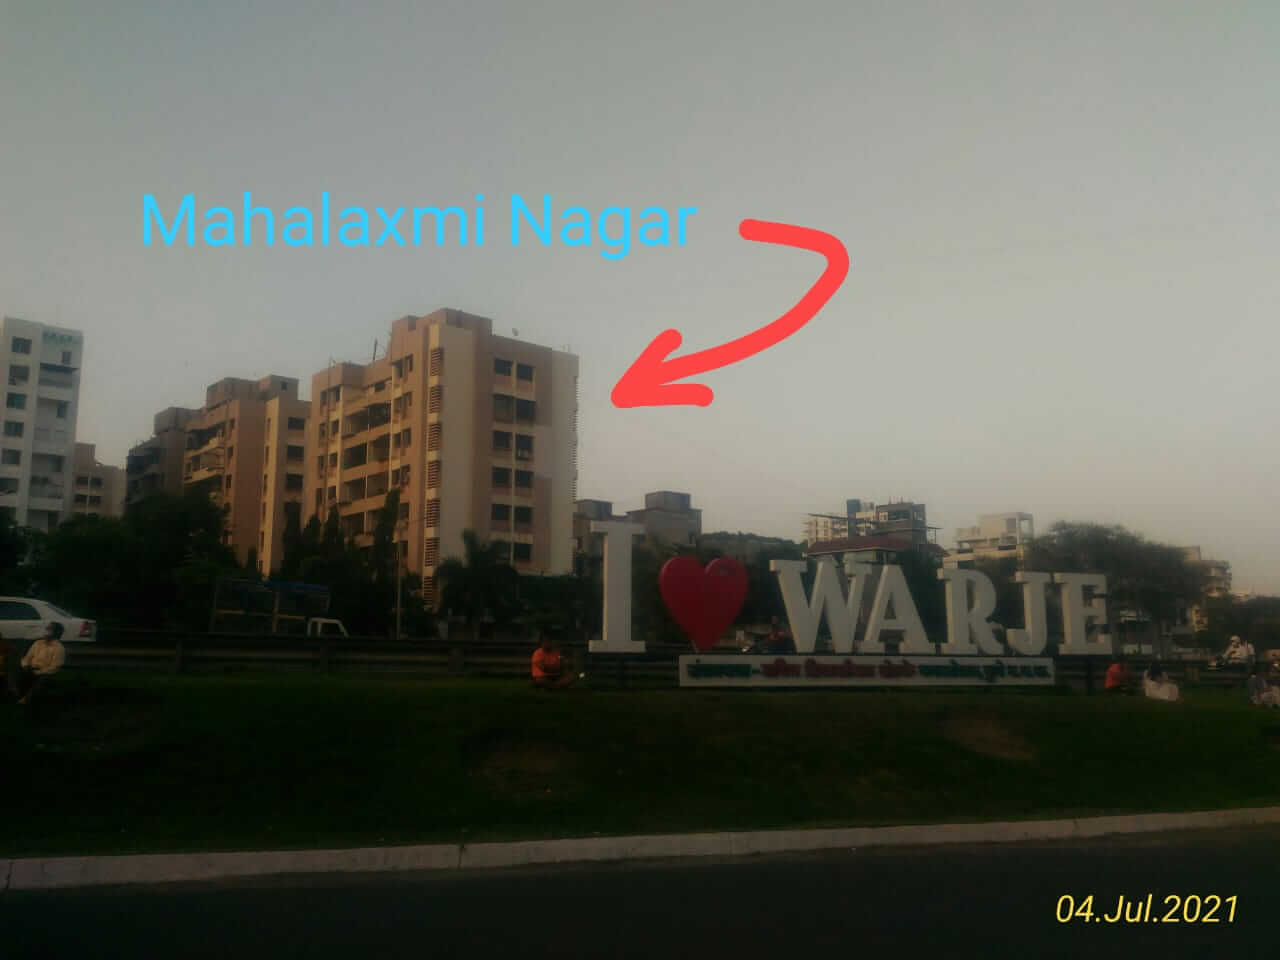 1 BHK Apartment / Flat for Rent 575 Sq. Feet at Pune, Waraje